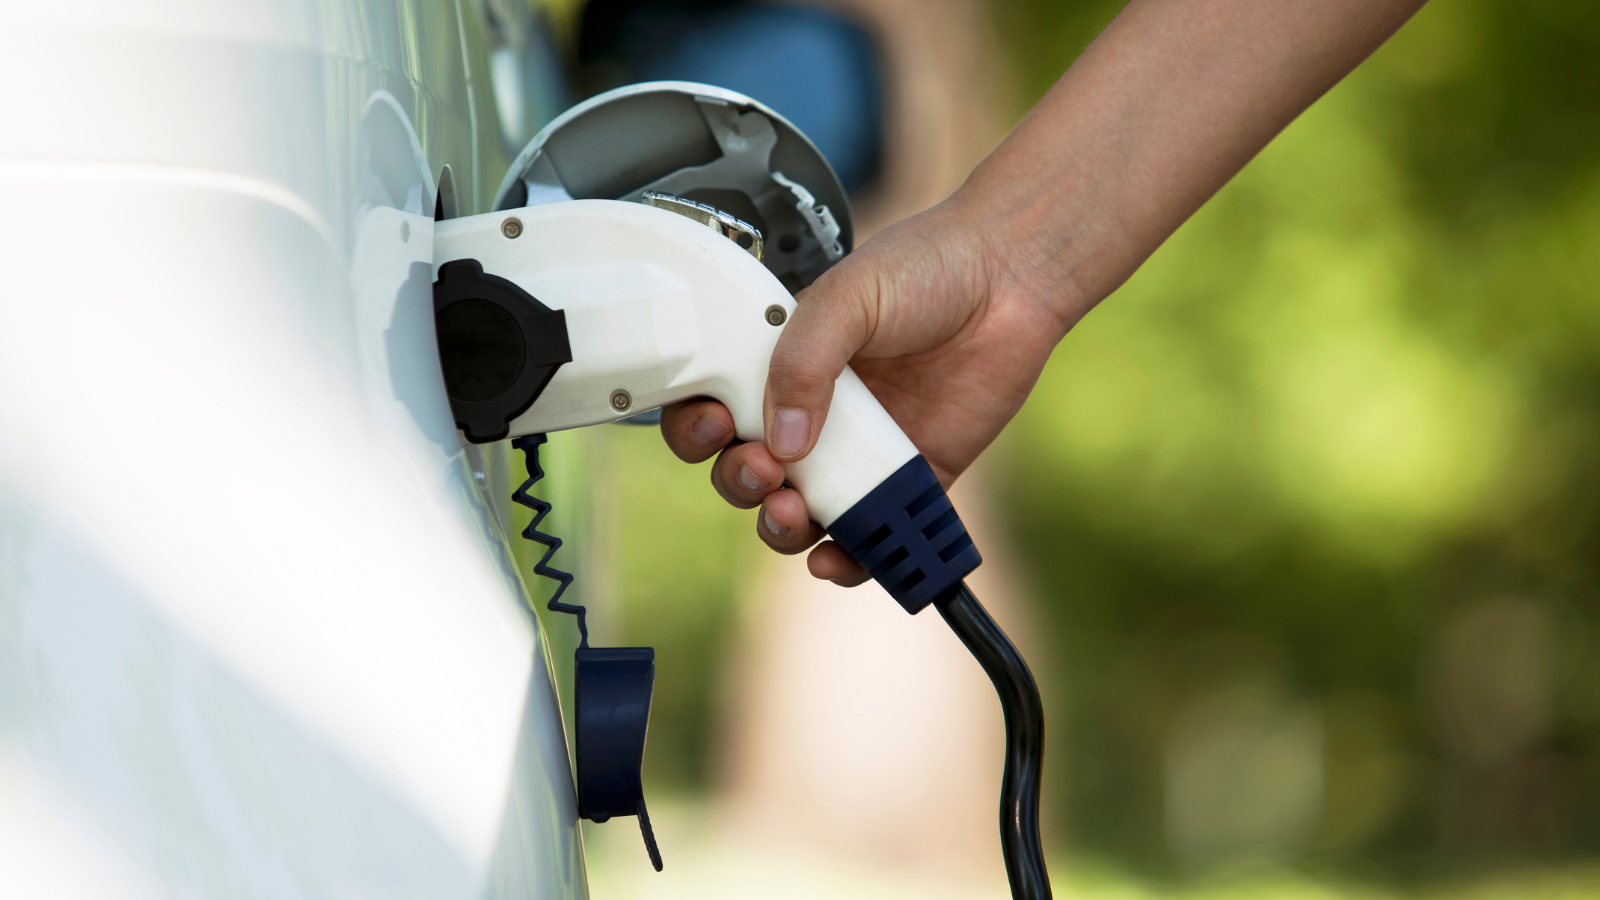 Fuel Cards UK: Is All-Electric the Future?